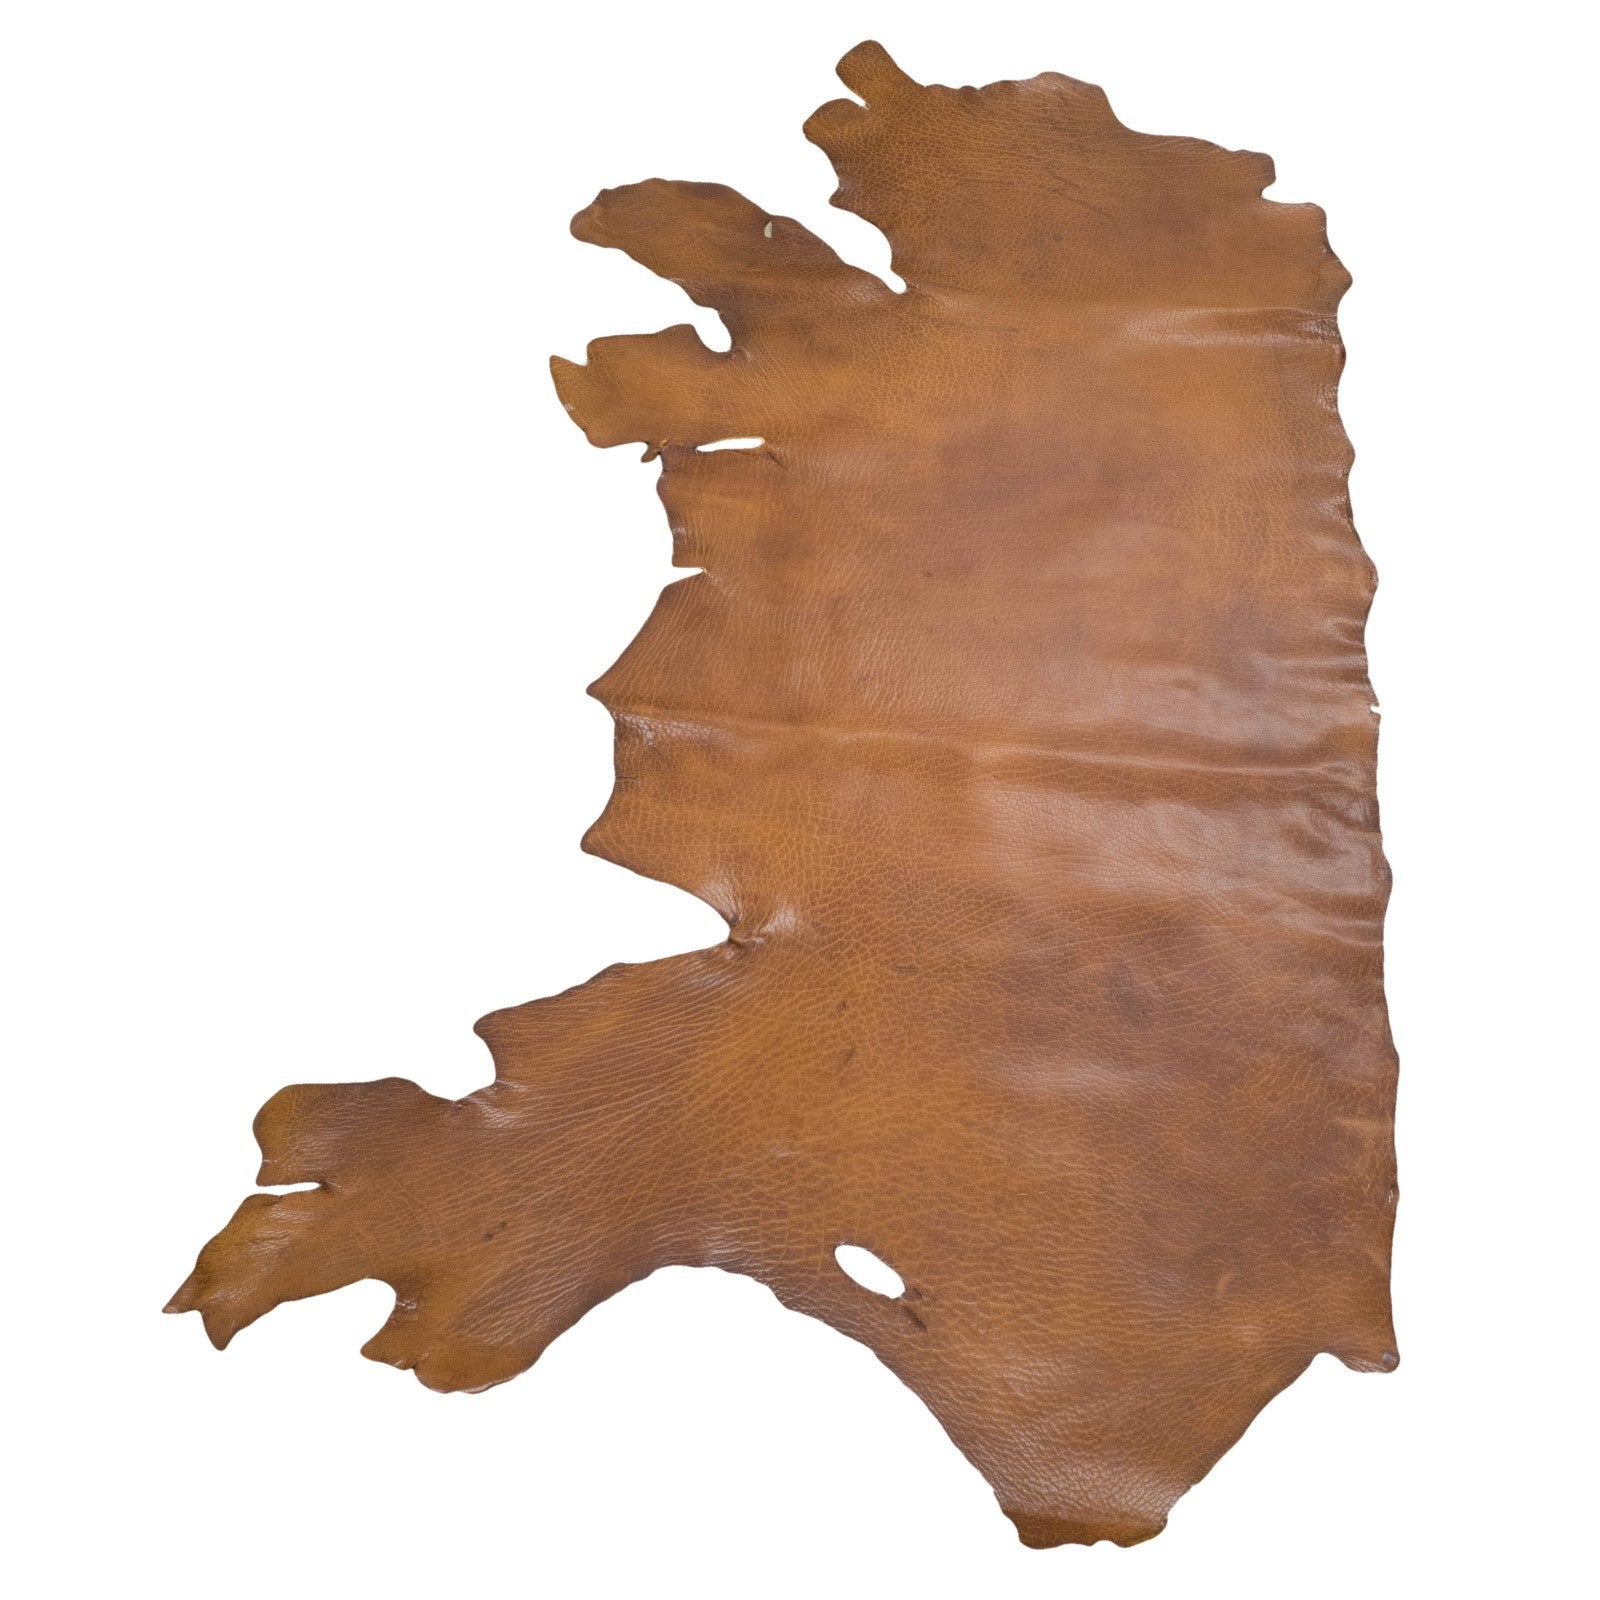 Great Herd Brown, 5-6 oz, 12-26 Sq Ft, Bison Sides, 18-20 Sq Ft | The Leather Guy